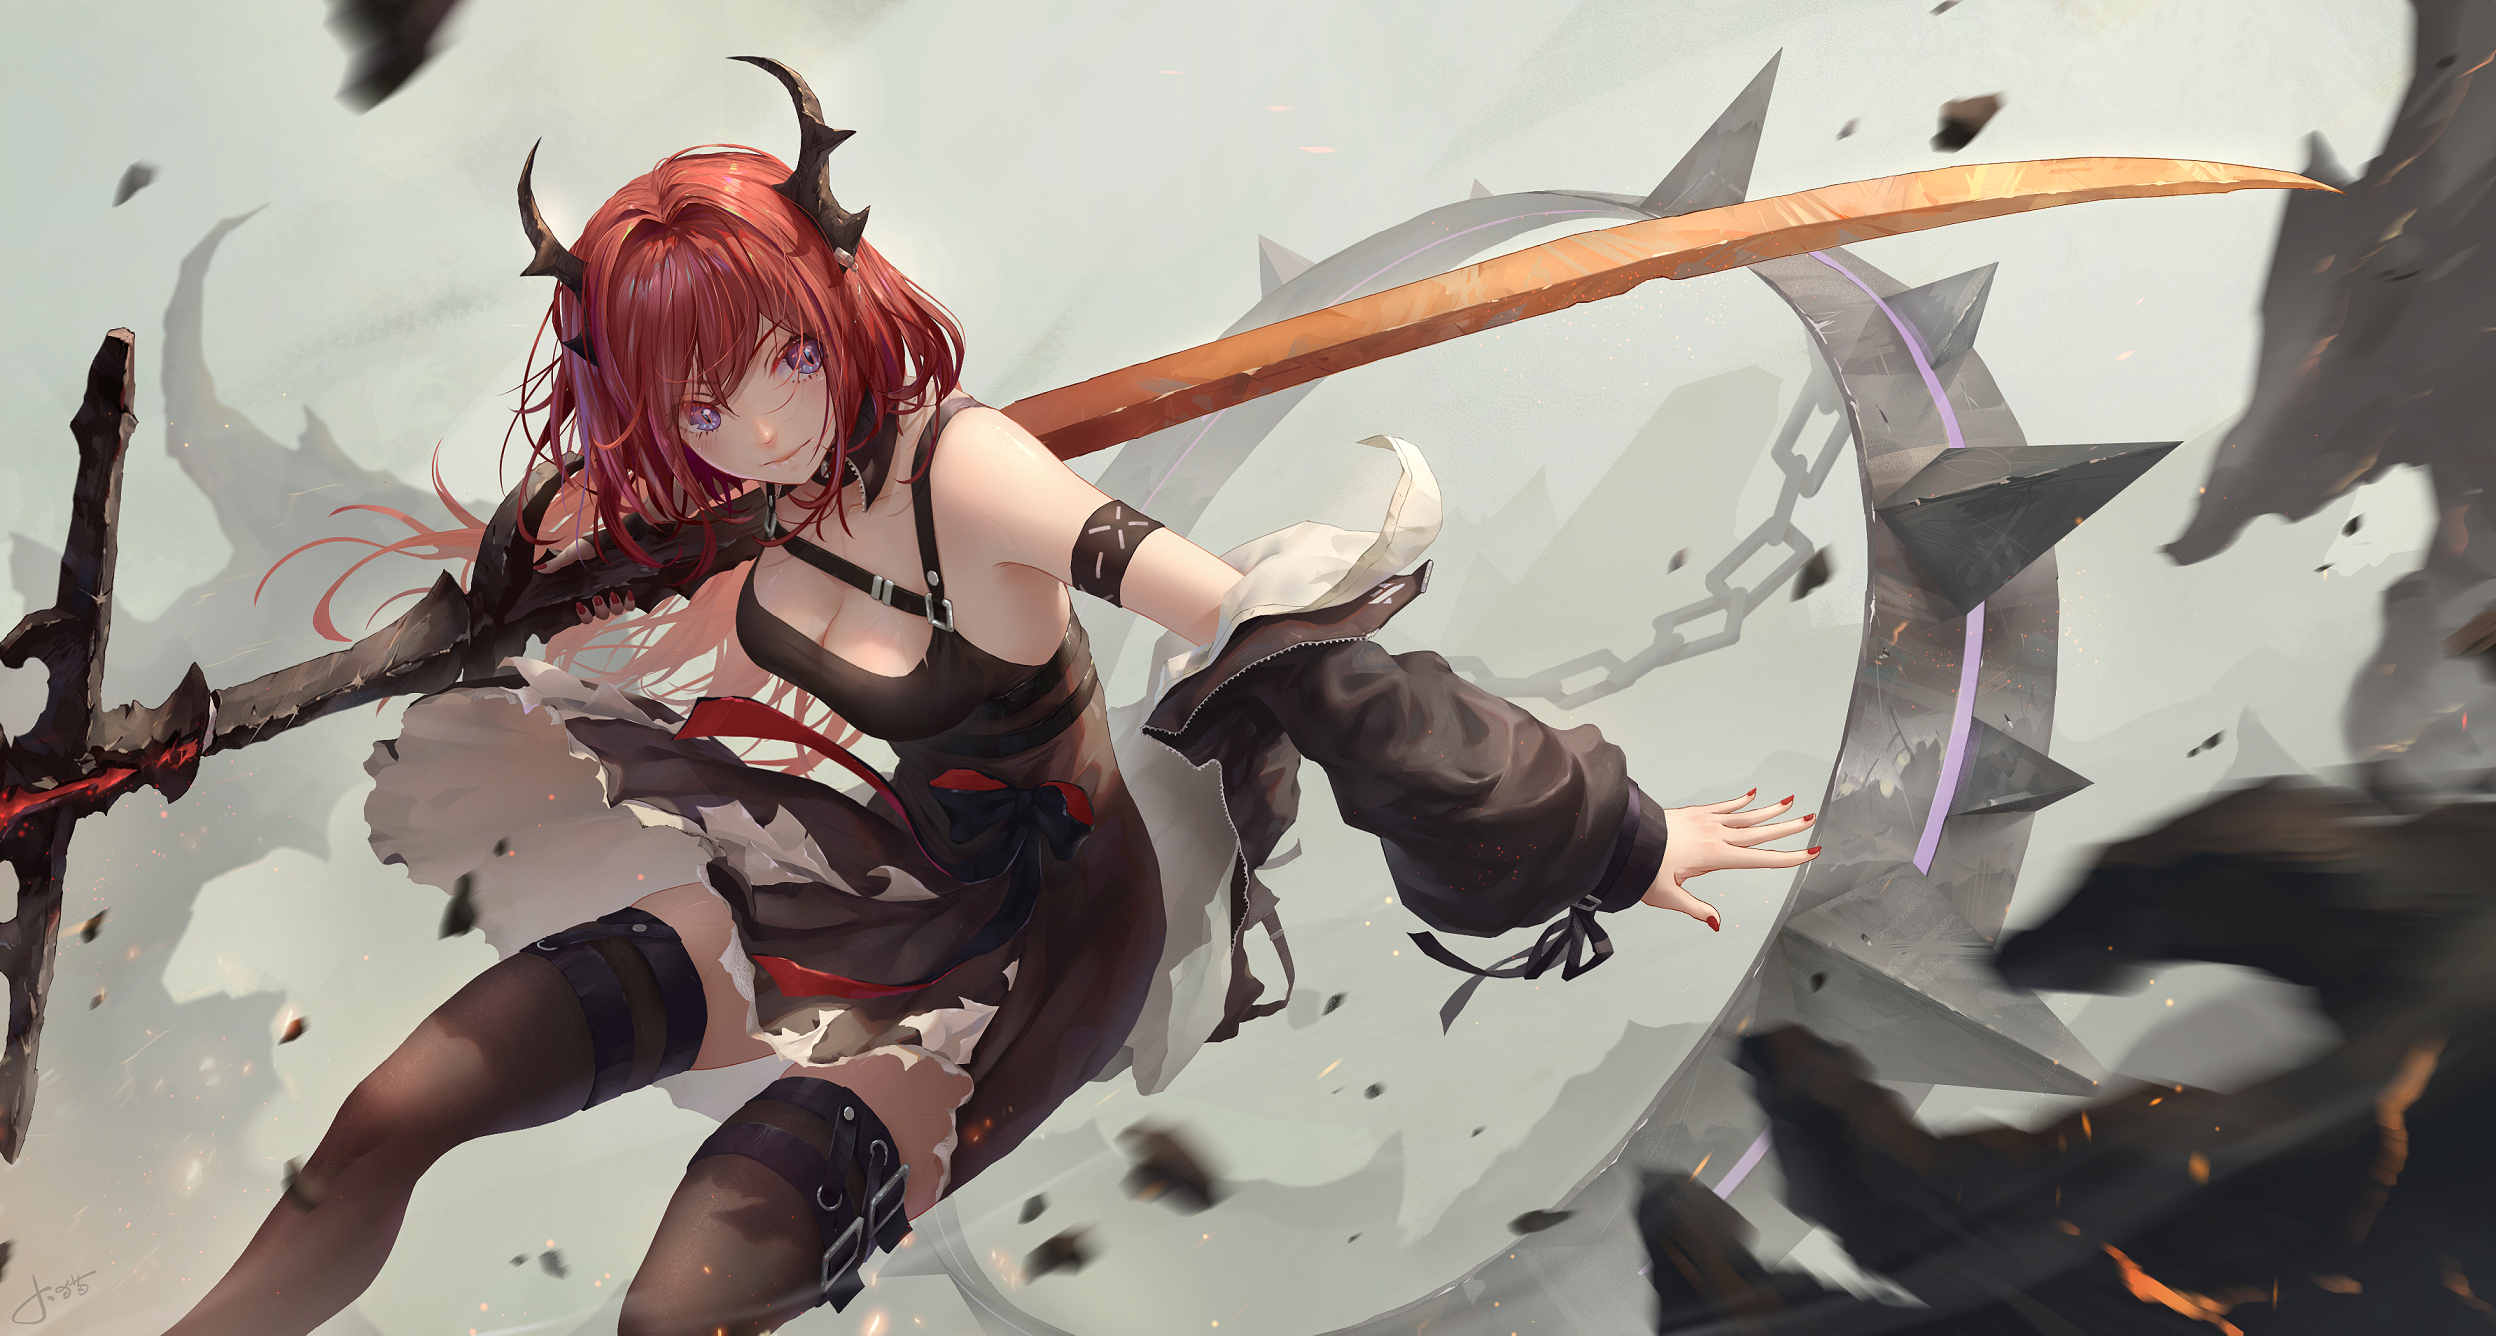 Surtr Arknights Arknights Video Games Video Game Girls Anime Anime Girls Fantasy Girl Horns Redhead  2496x1336